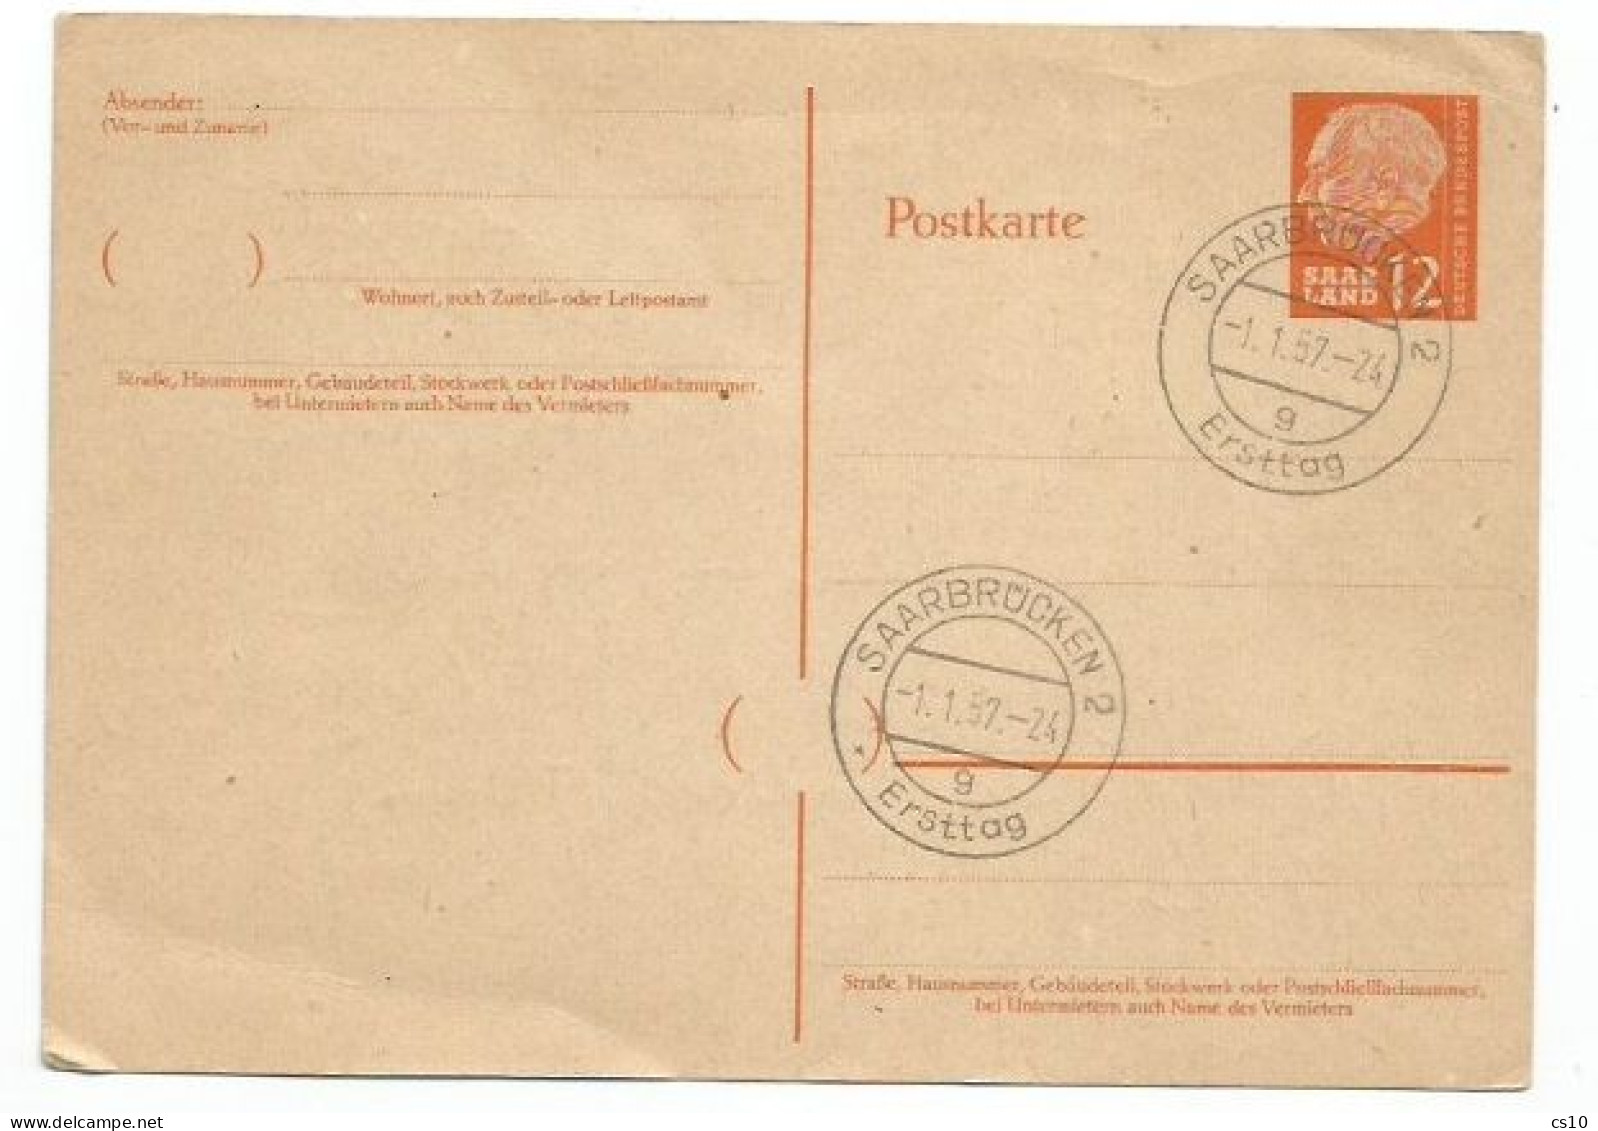 SaarLand PSC Card  President Heuss 12F With PMK Erstag 1jan1957 "Back To Germany" Day - Storia Postale